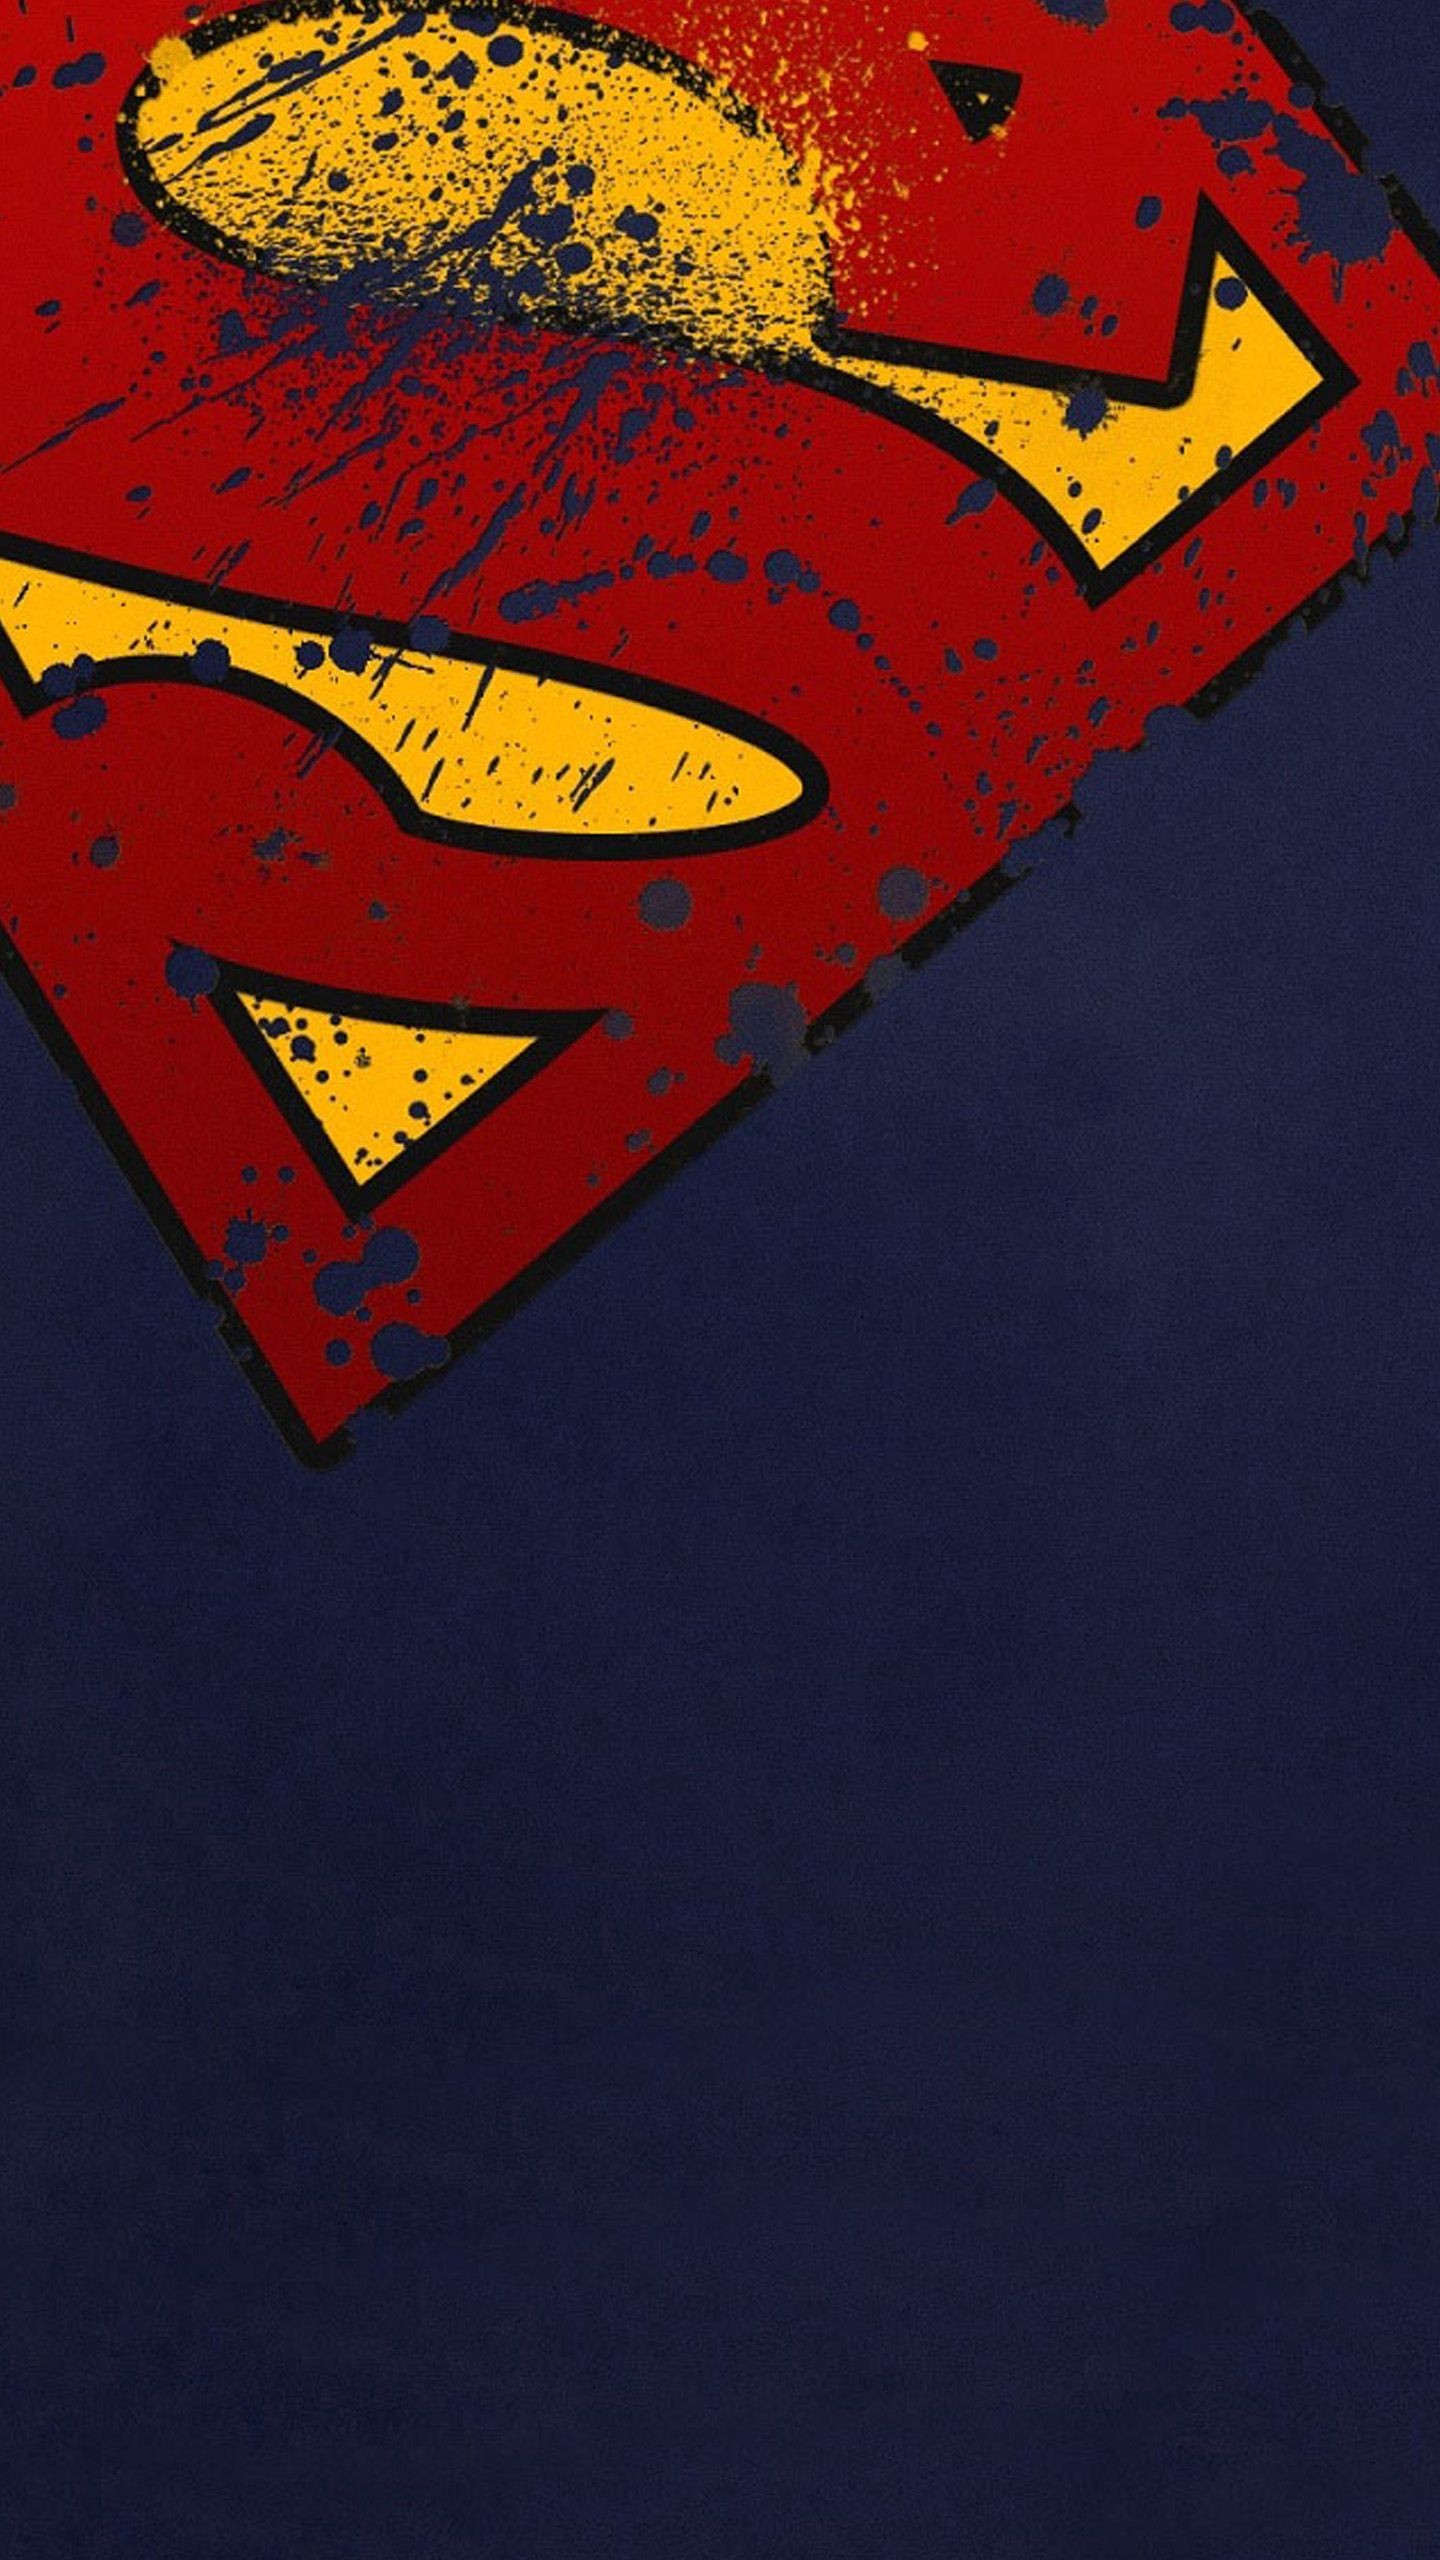 wallpaper hd download for android mobile,superman,red,t shirt,fictional character,yellow